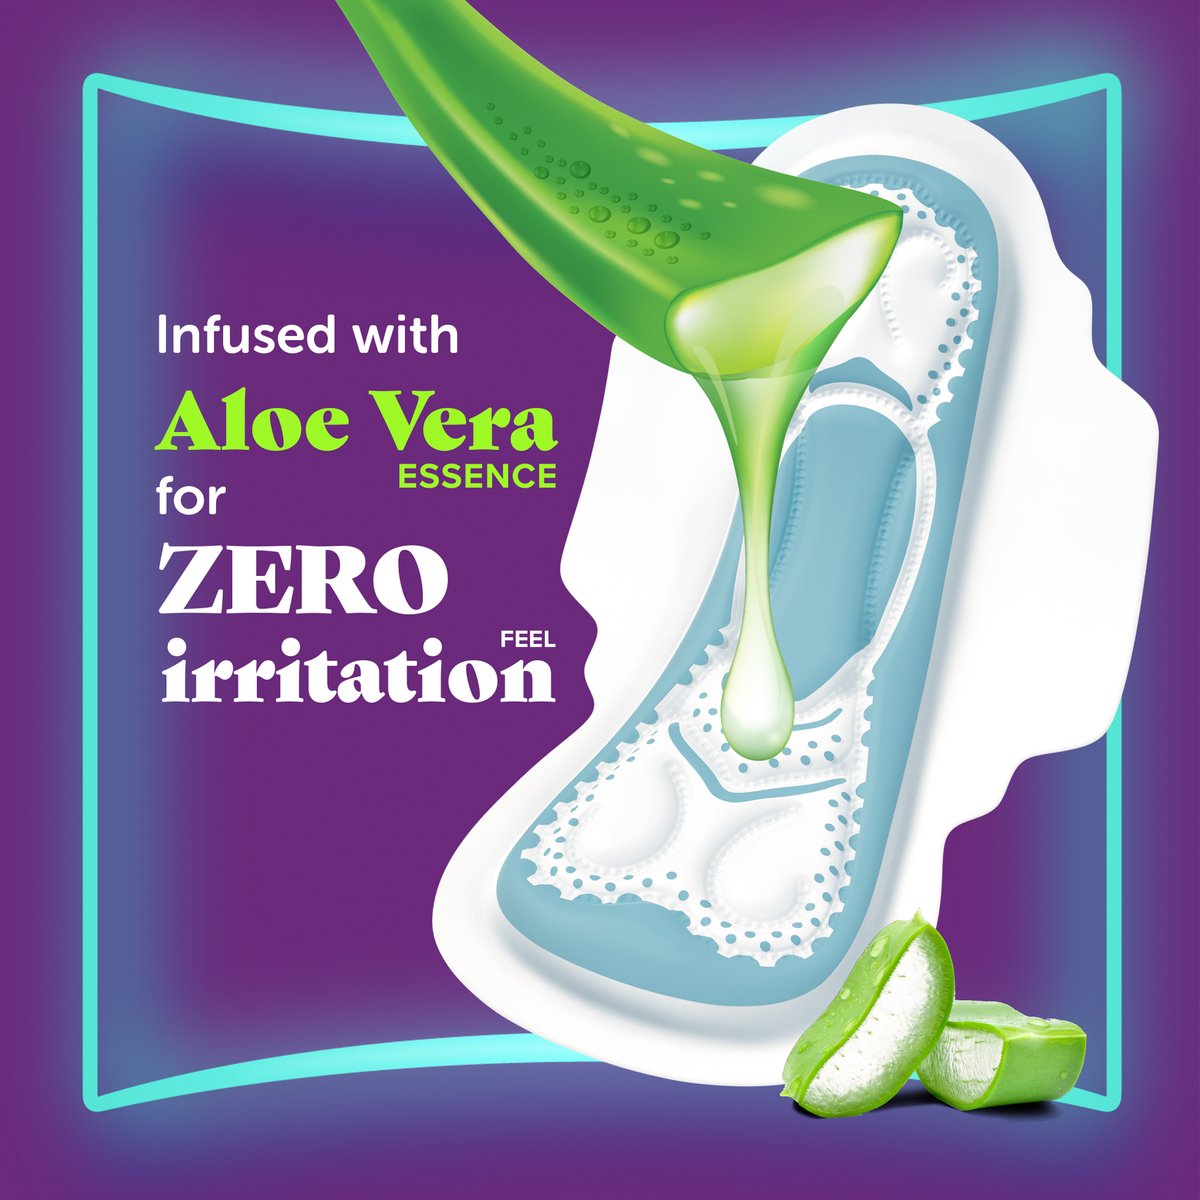 Always Aloe Cool Aloe Vera Essence For Light Days For Zero Irritation Feel Long Maxi Thick Pads Sanitary Pads With Wings 50 pcs